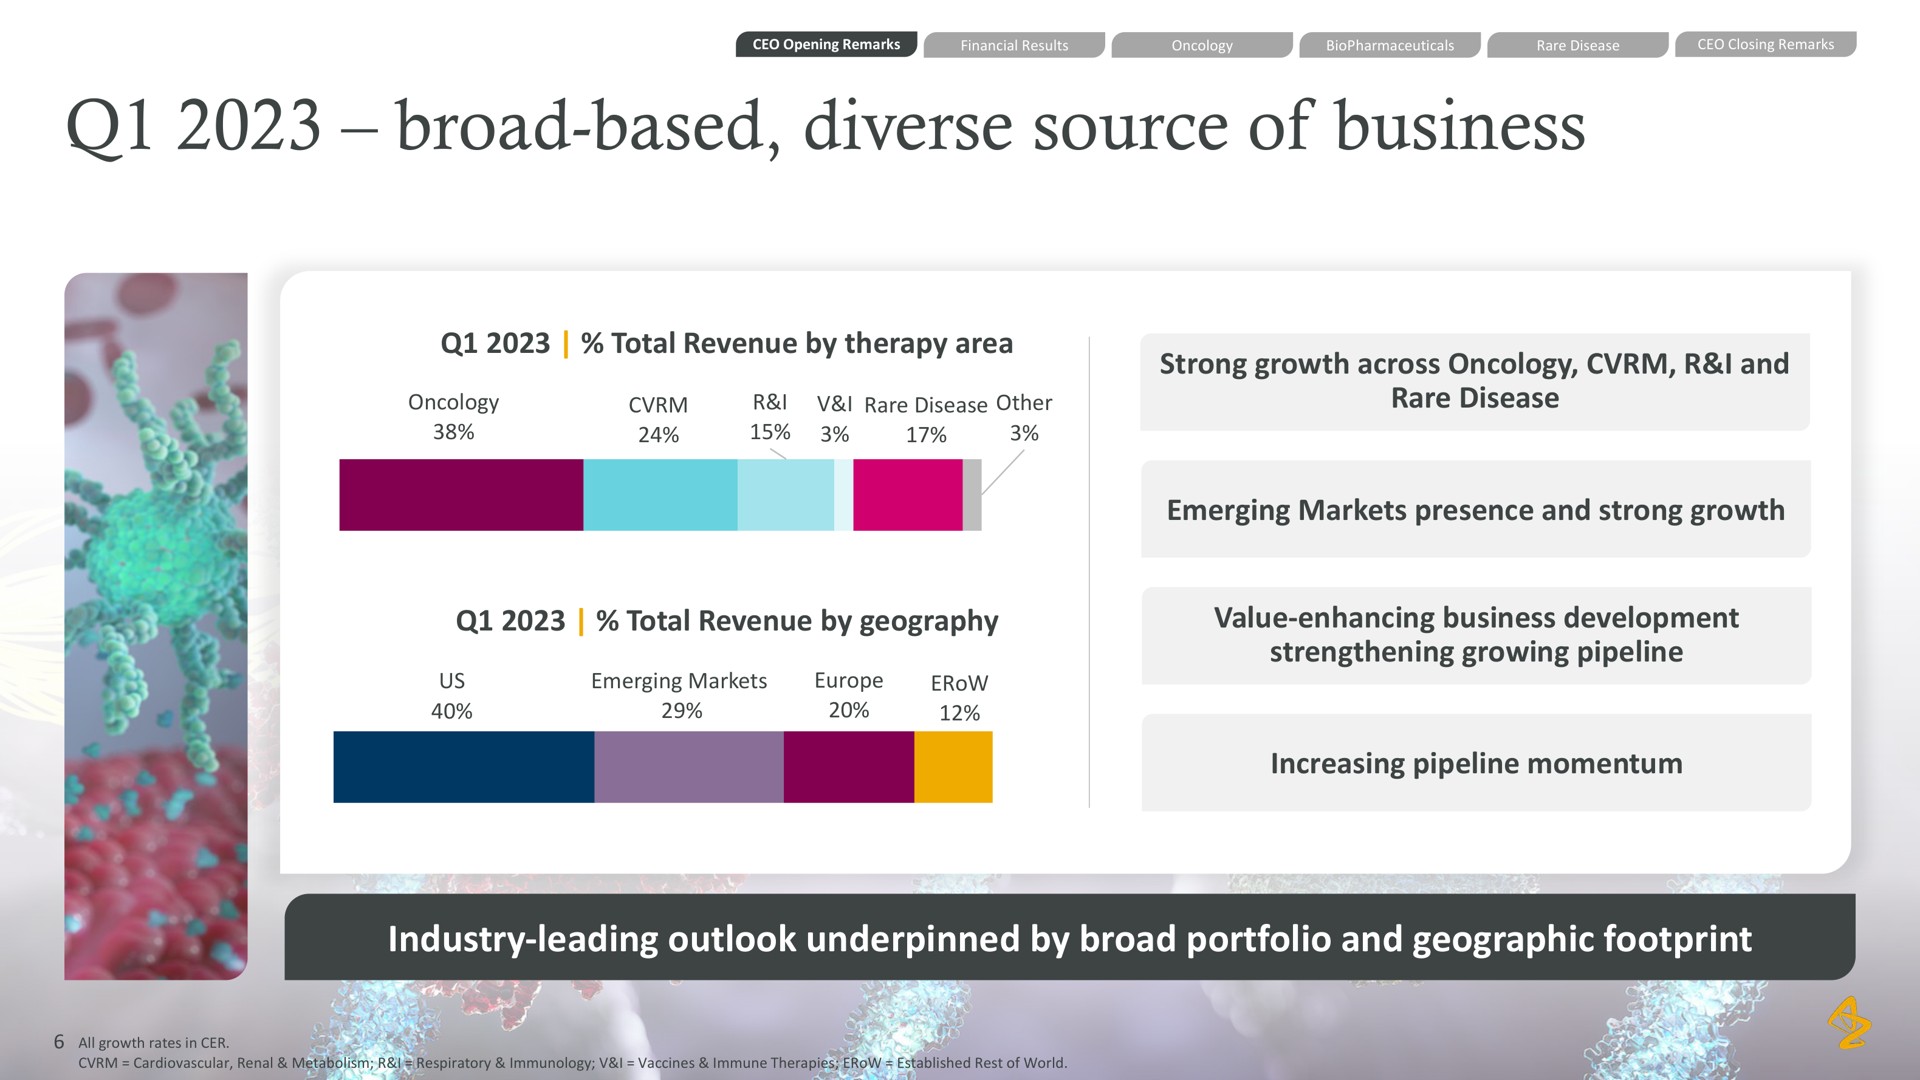 broad based diverse source of business total revenue by therapy area strong growth across oncology i and rare disease total revenue by geography emerging markets presence and strong growth value enhancing business development strengthening growing pipeline increasing pipeline momentum industry leading outlook underpinned by broad portfolio and geographic footprint | AstraZeneca